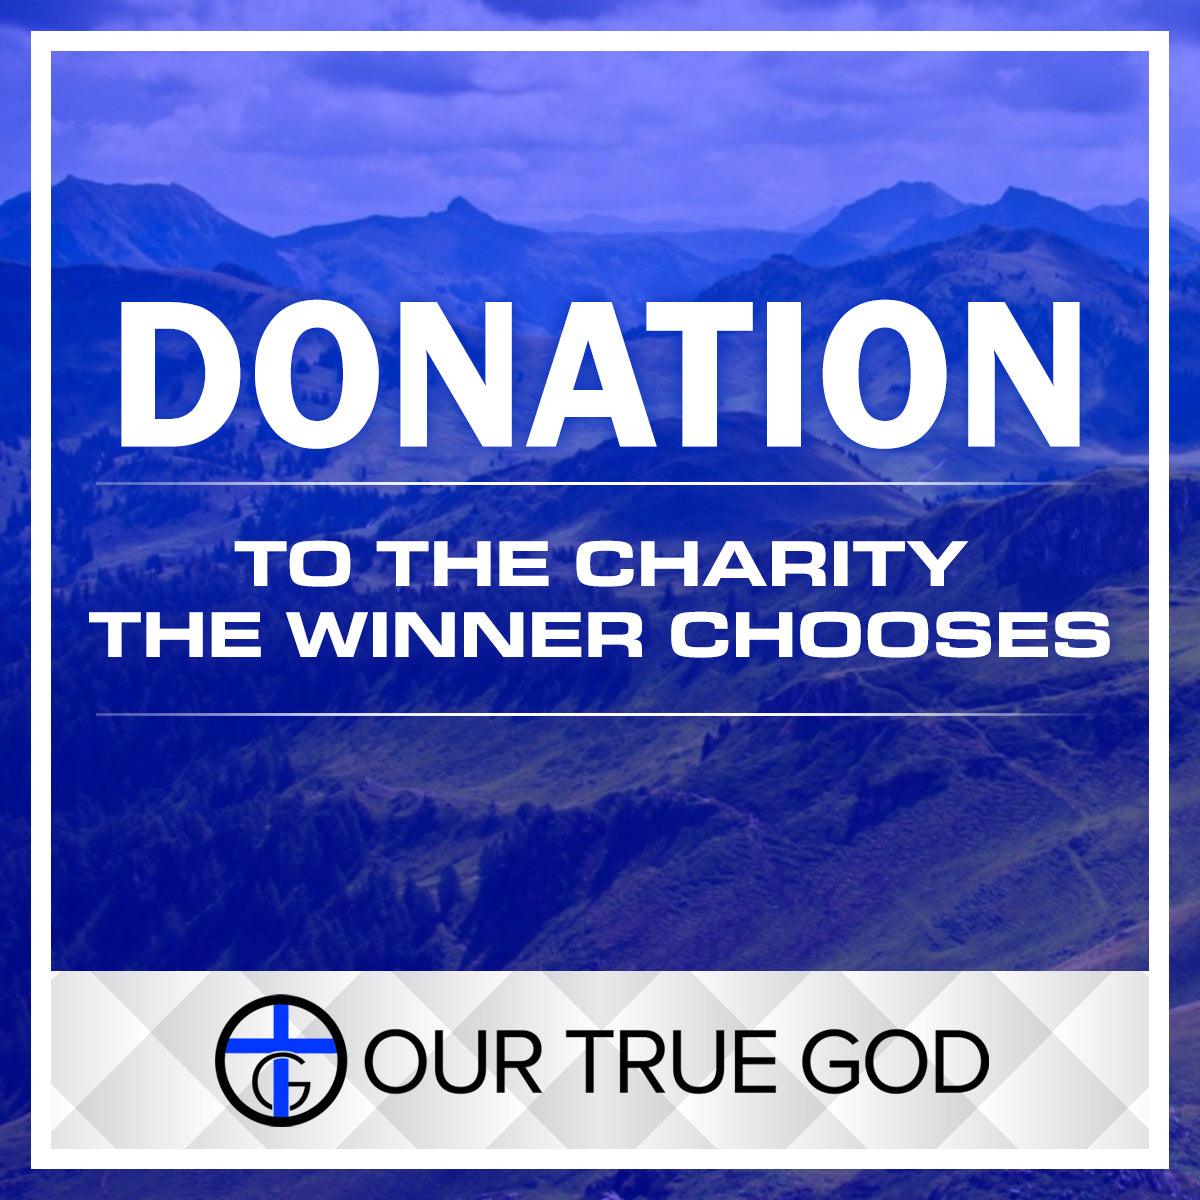 Donation To Charity - Our True God